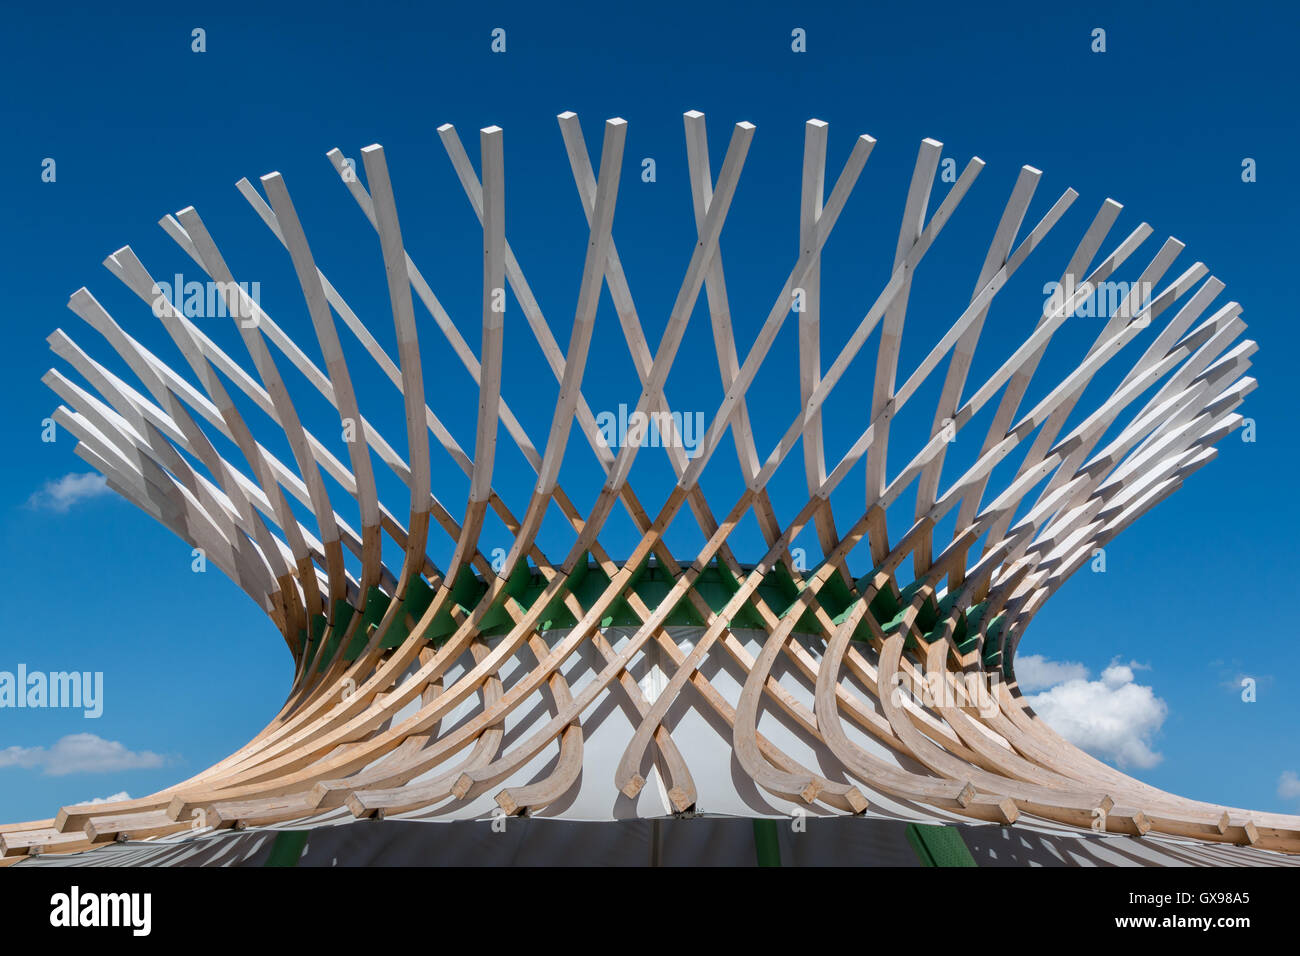 https://c8.alamy.com/comp/GX98A5/wooden-curved-structure-building-with-modern-architectural-design-GX98A5.jpg